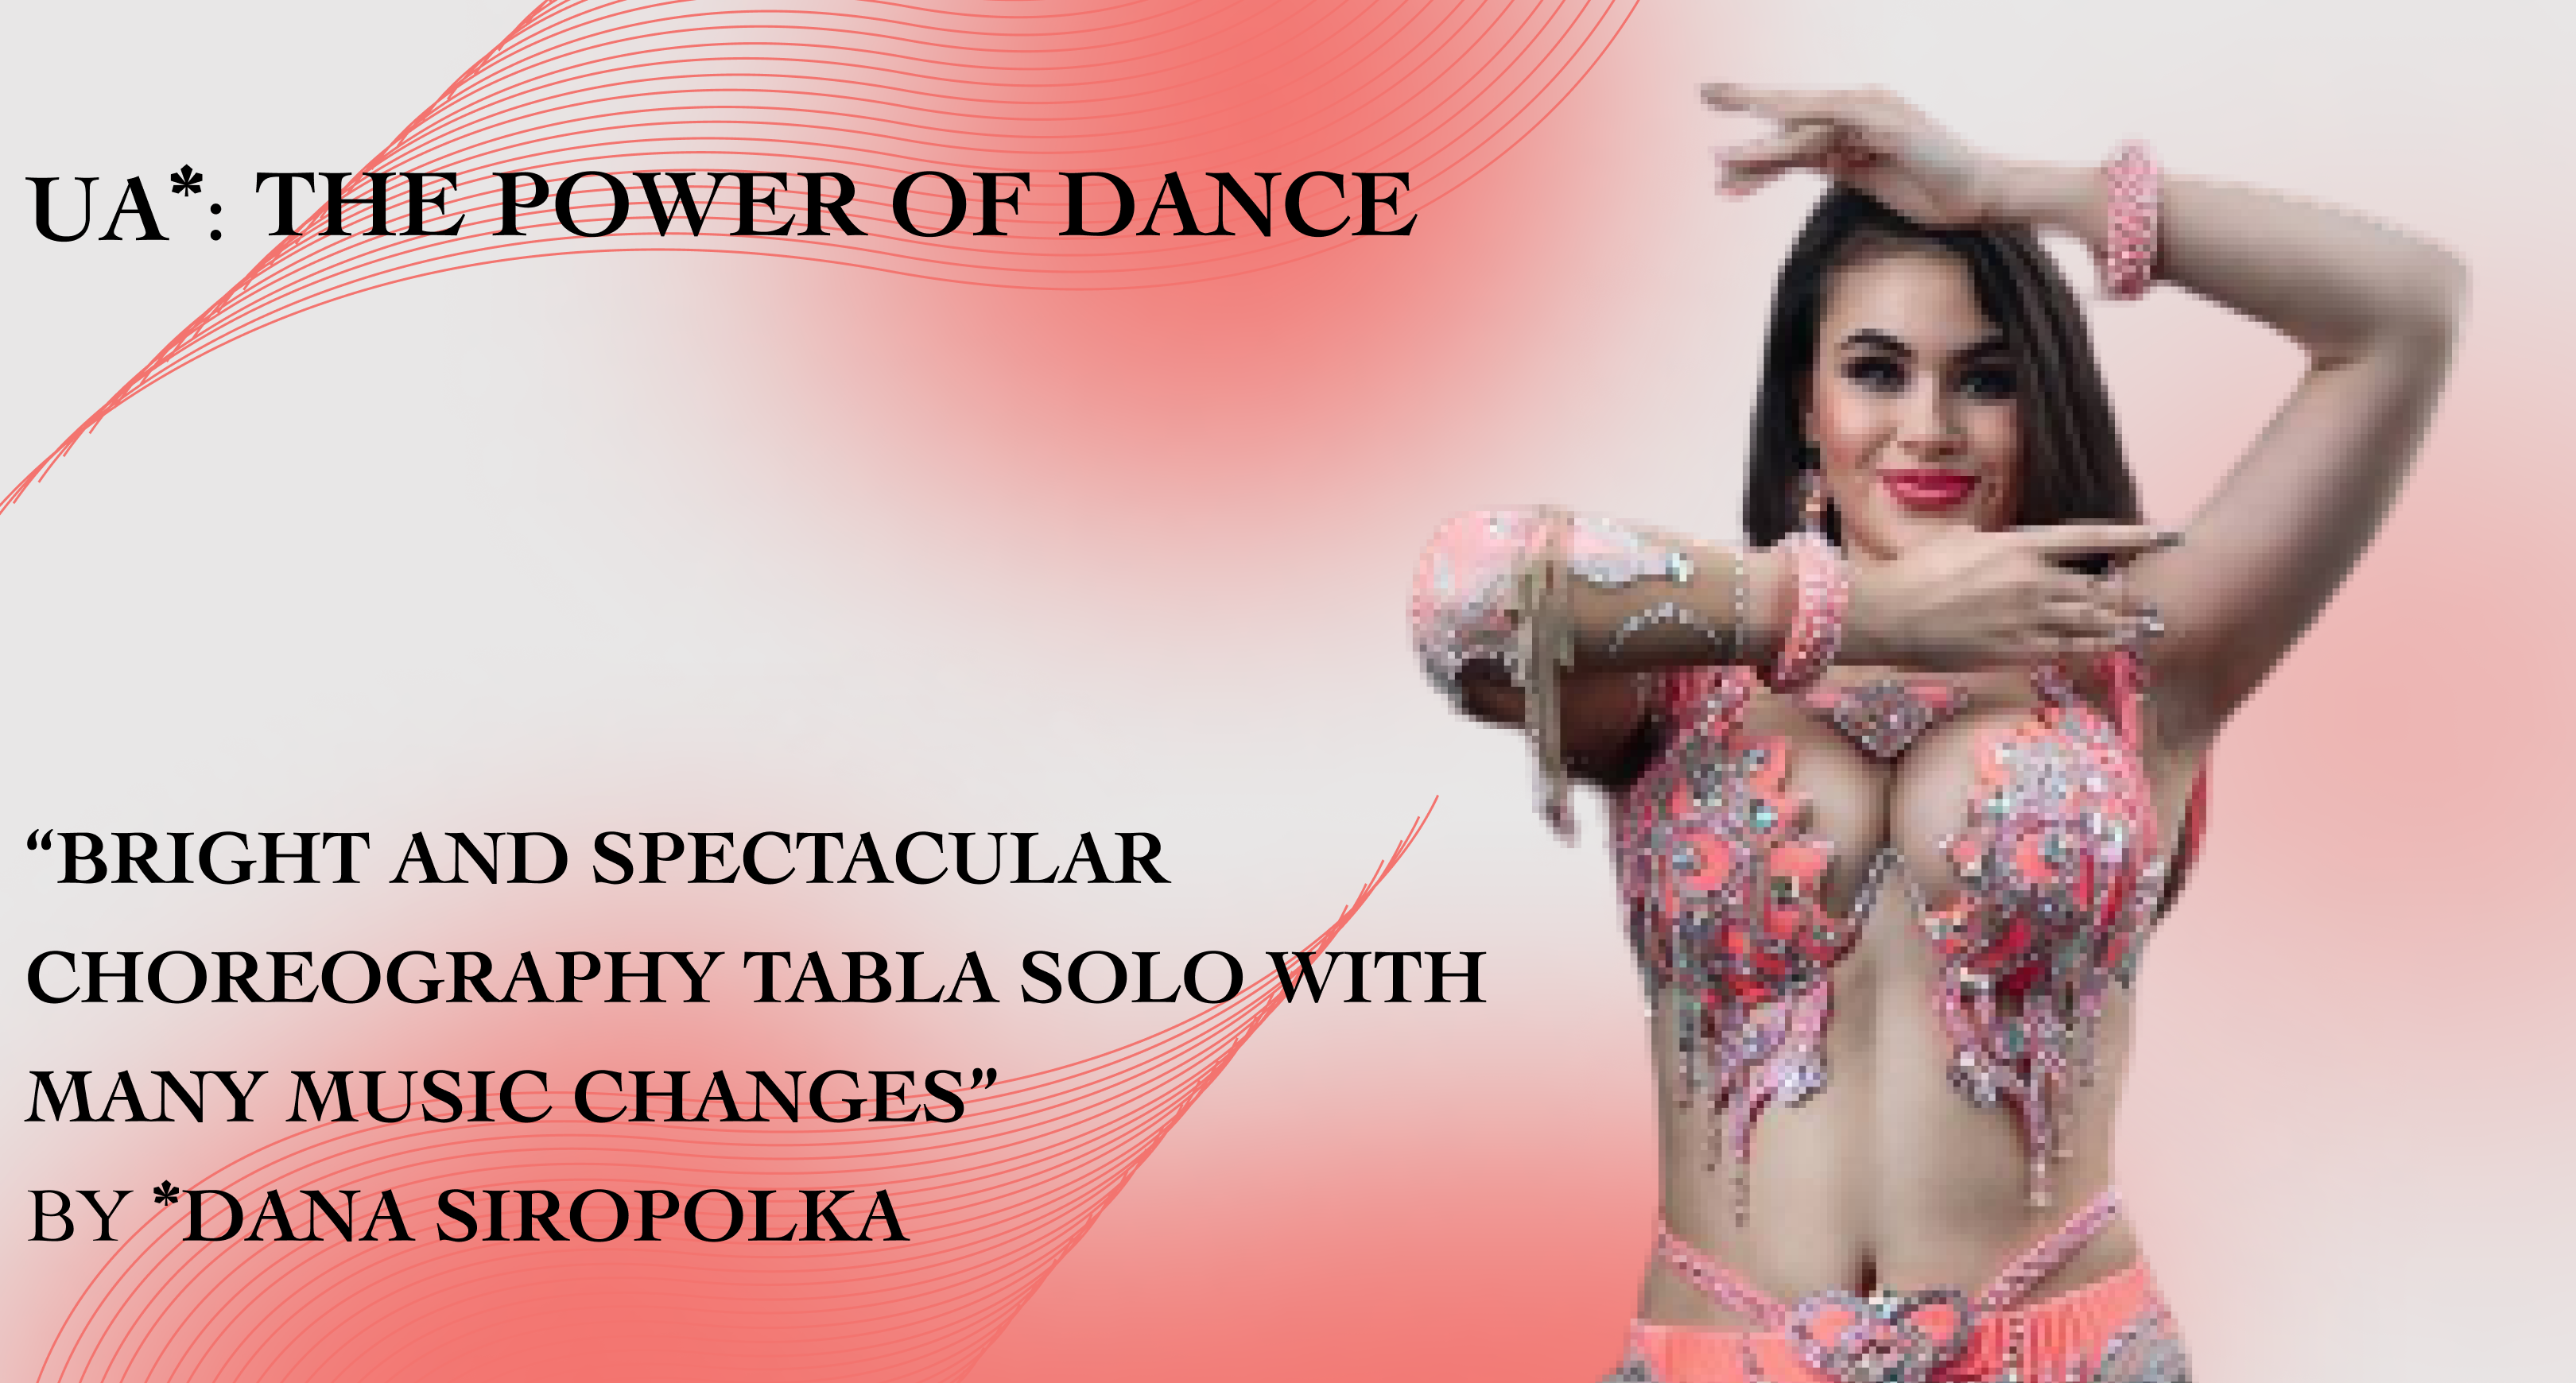 UA*: THE POWER OF DANCE: “Bright and spectacular choreography tabla solo with many music changes” by Dana Siropolka